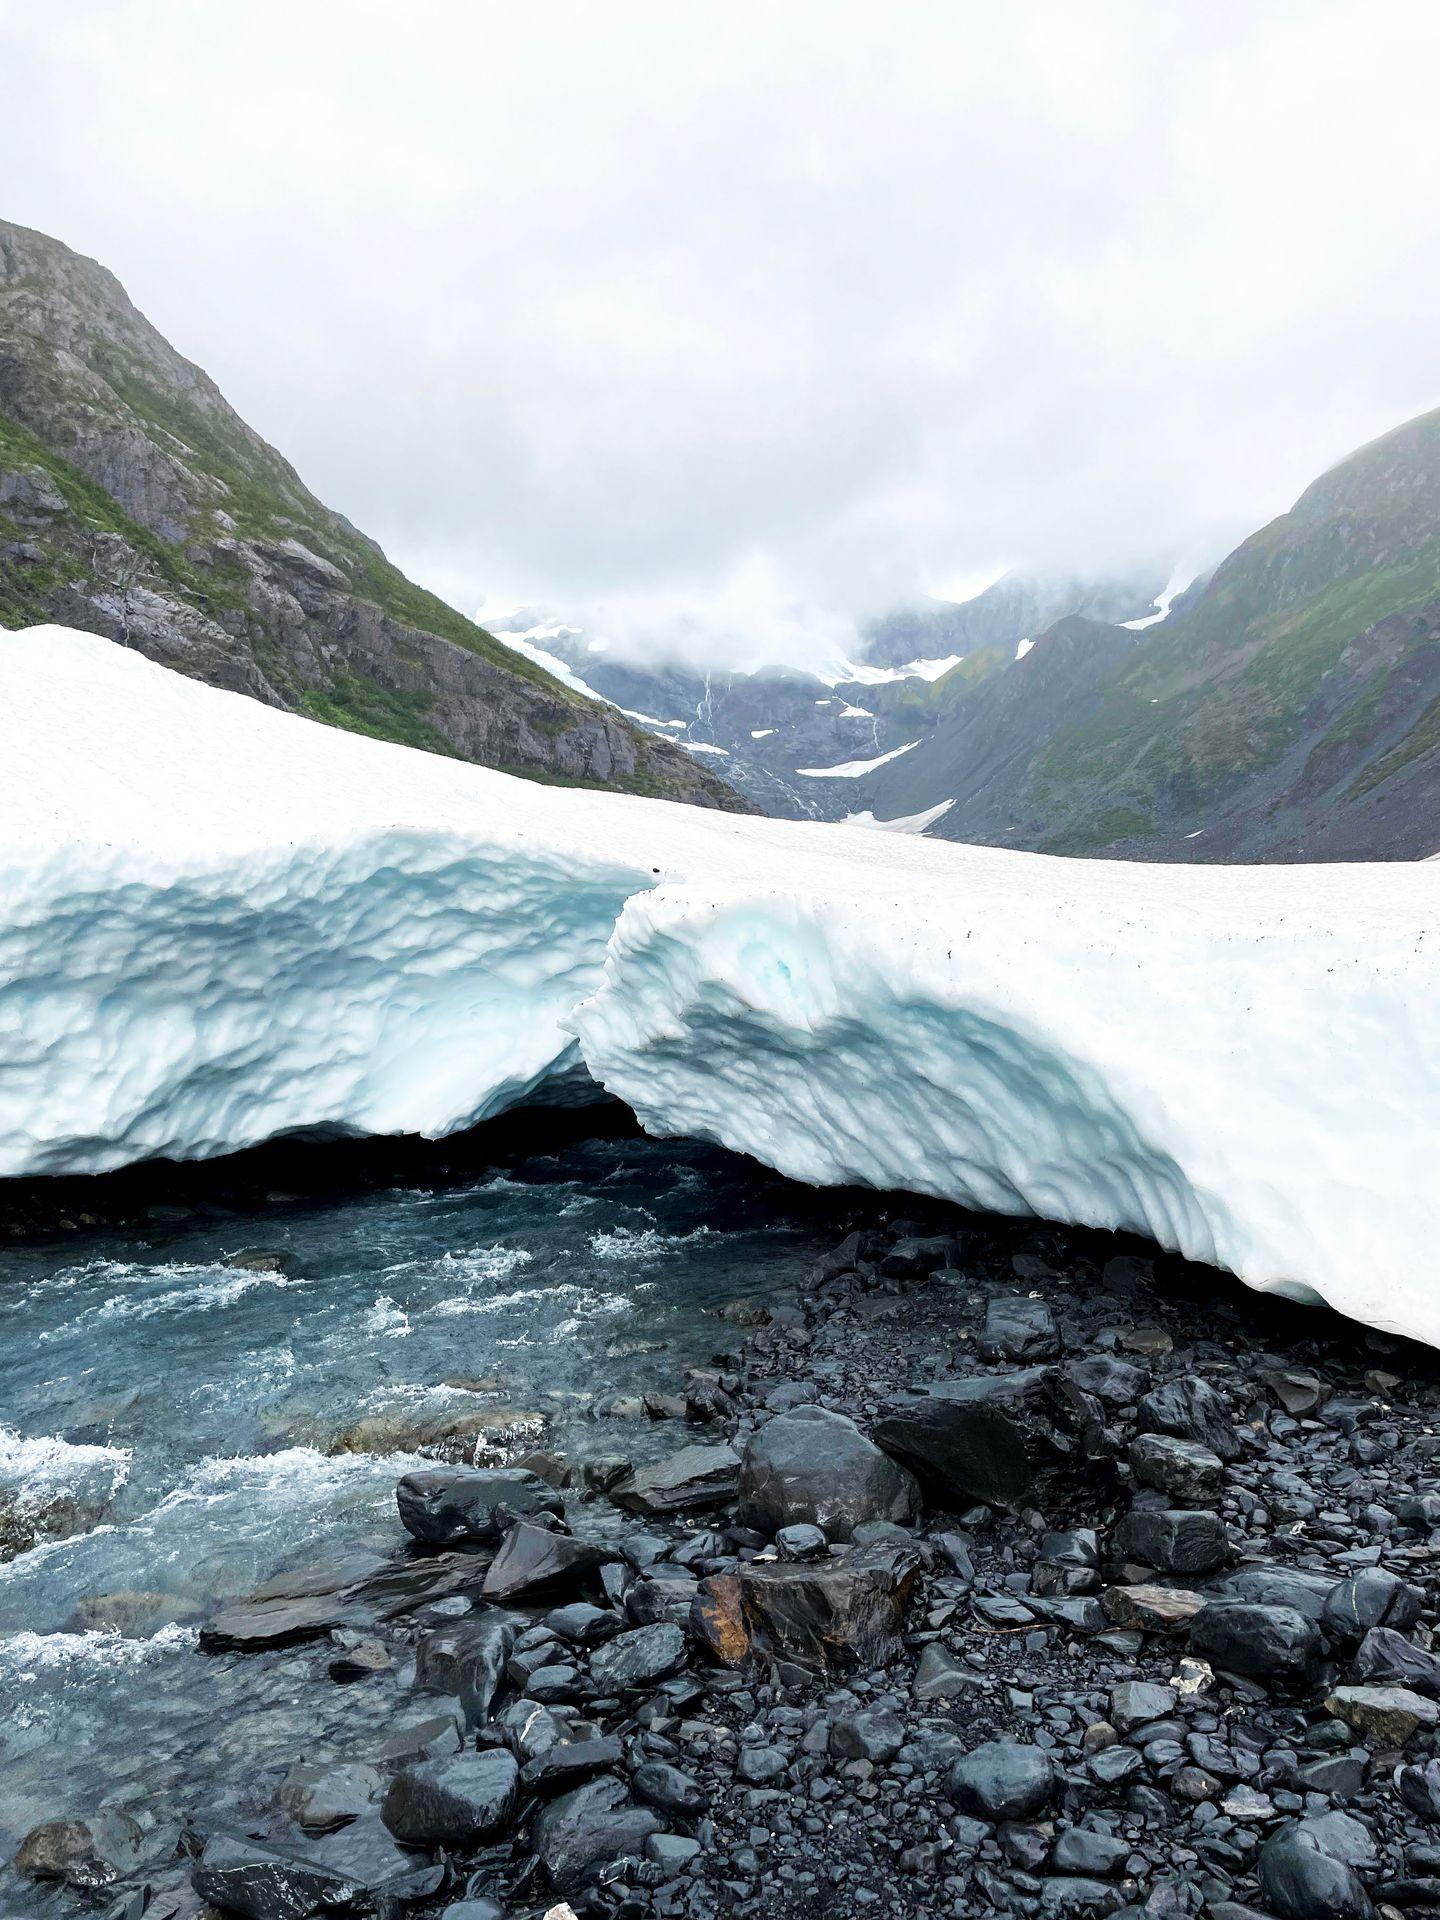 A small glacier with a river flowing under it and mountains in the background.